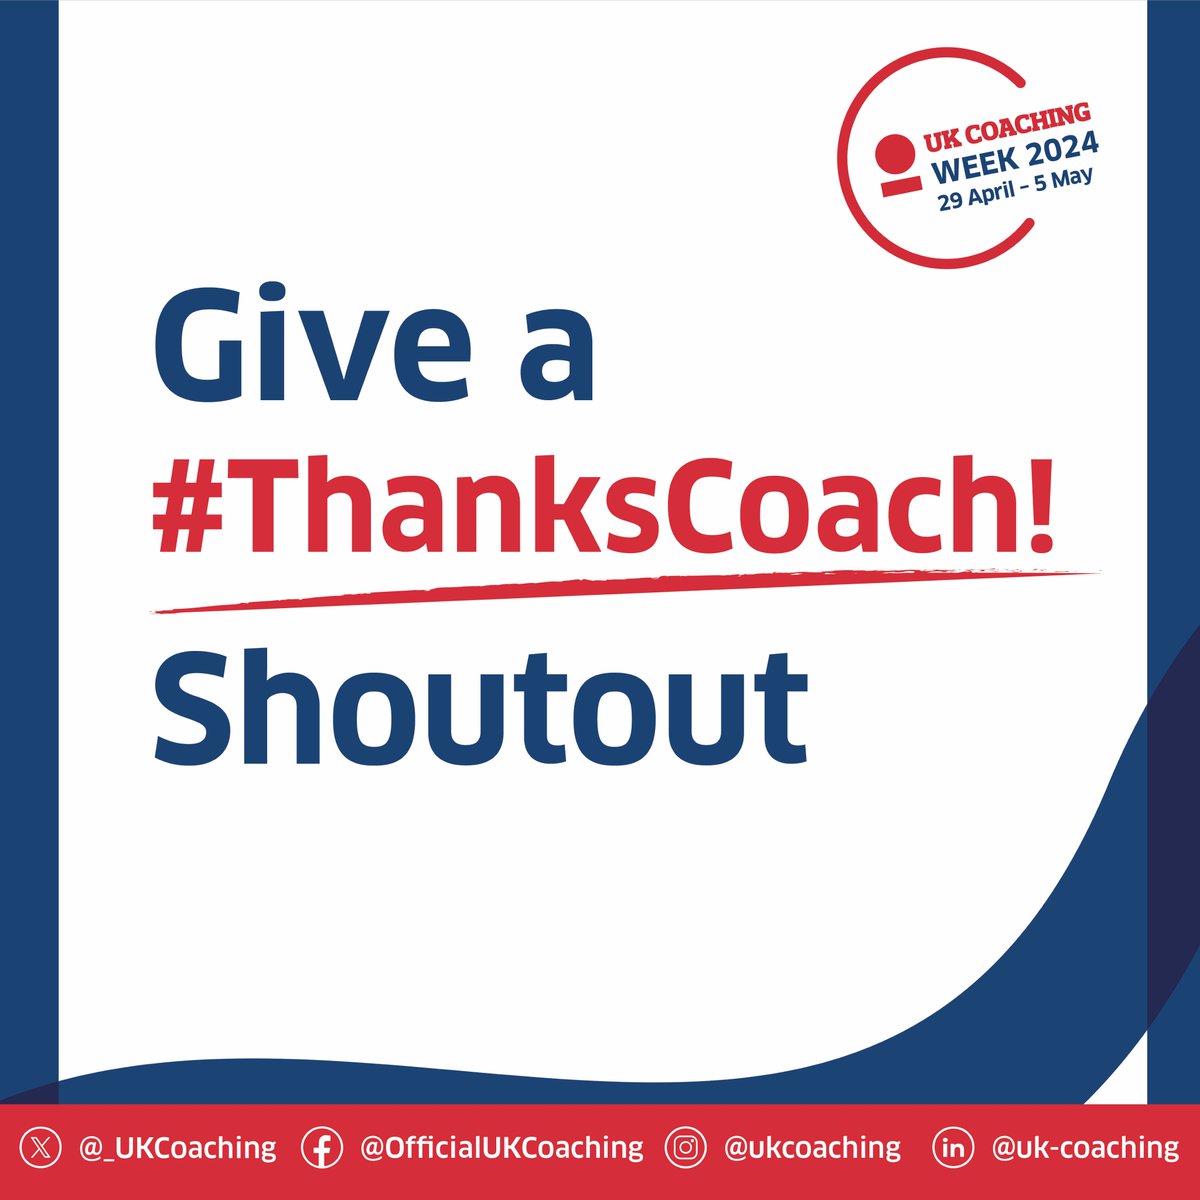 🗓️ #UKCoachingWeek starts now! We're celebrating the incredible individuals who make a positive difference on and beyond the court 👏 Share your #ThanksCoach message and tag @_UKCoaching 😃